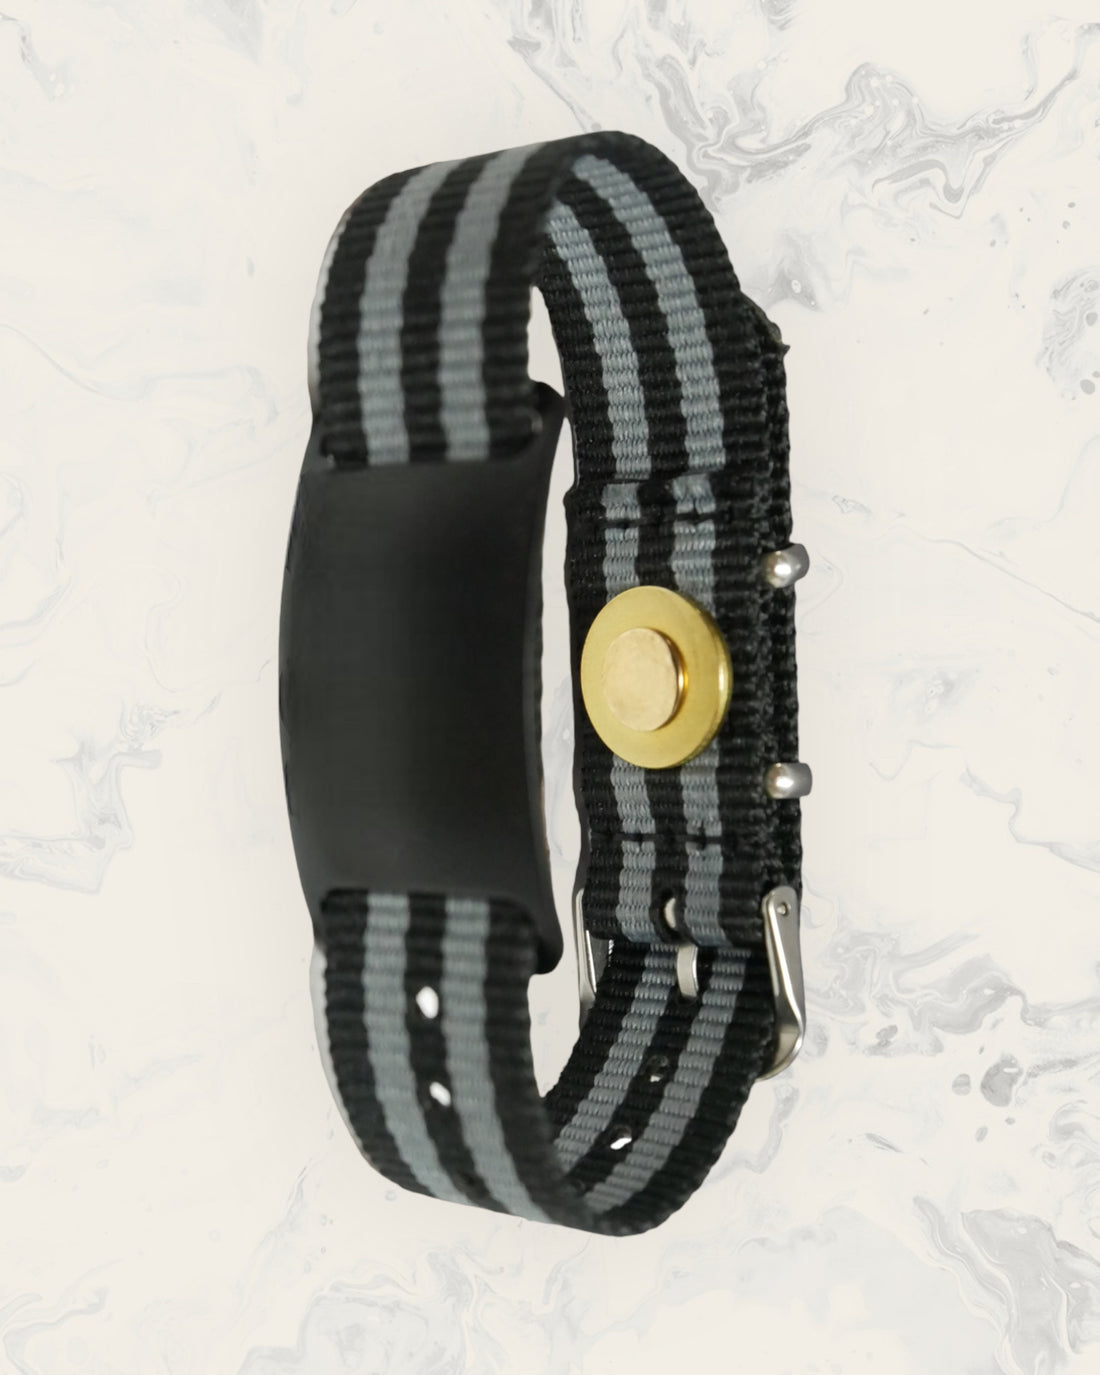 Natural Pain Relief and EMF Protection Bracelet Nylon Band Color Black and Gray Striped with a Black Slider